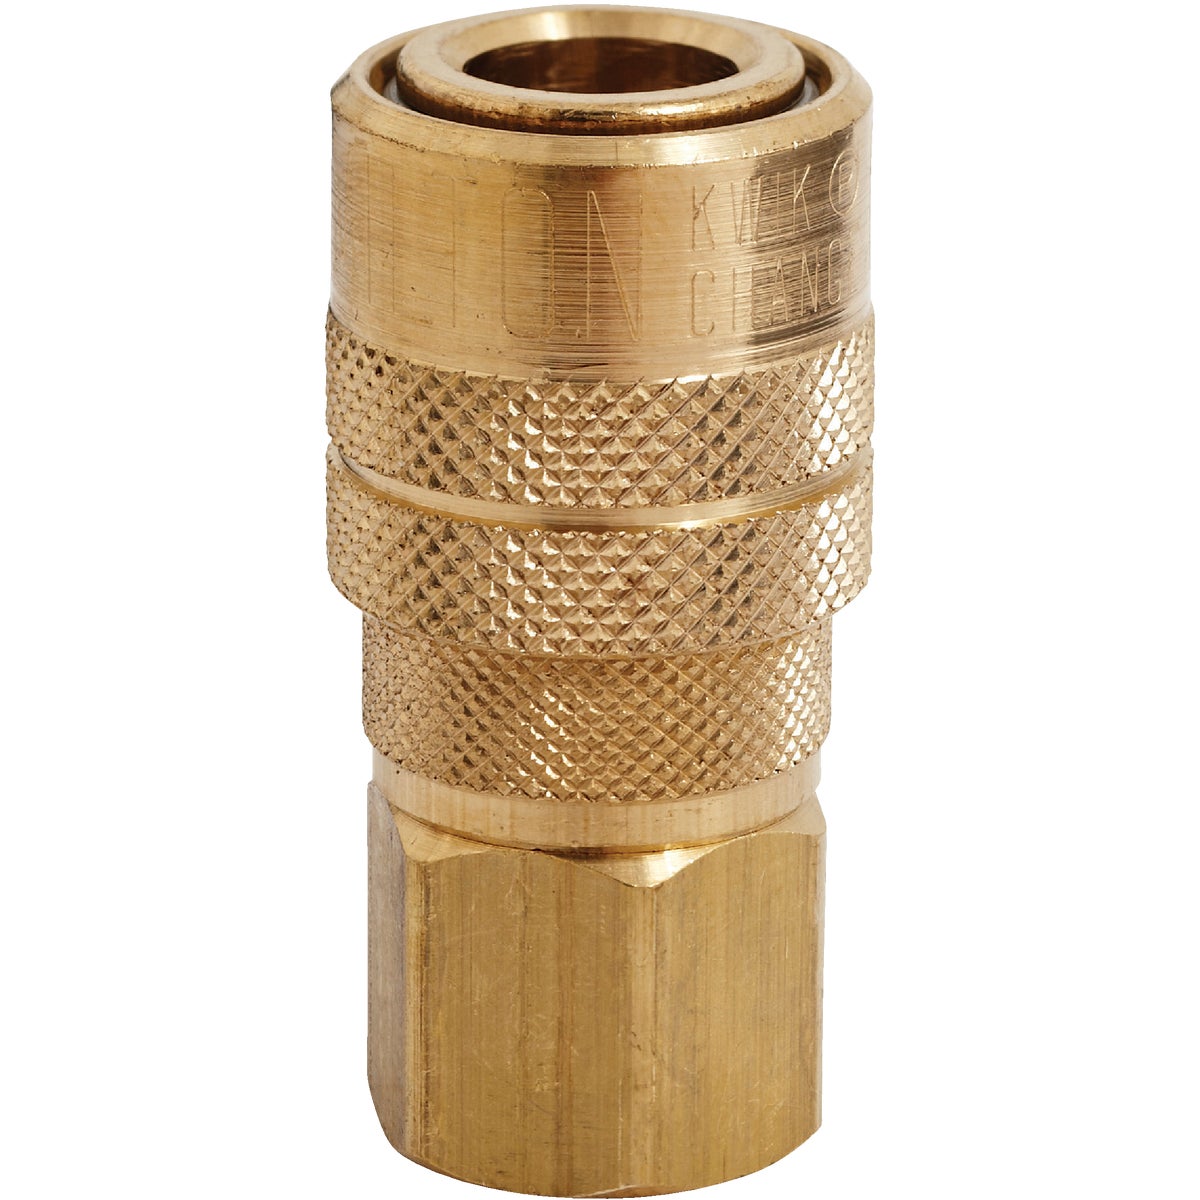 Item 582907, M-Style, brass body and sleeve coupler.